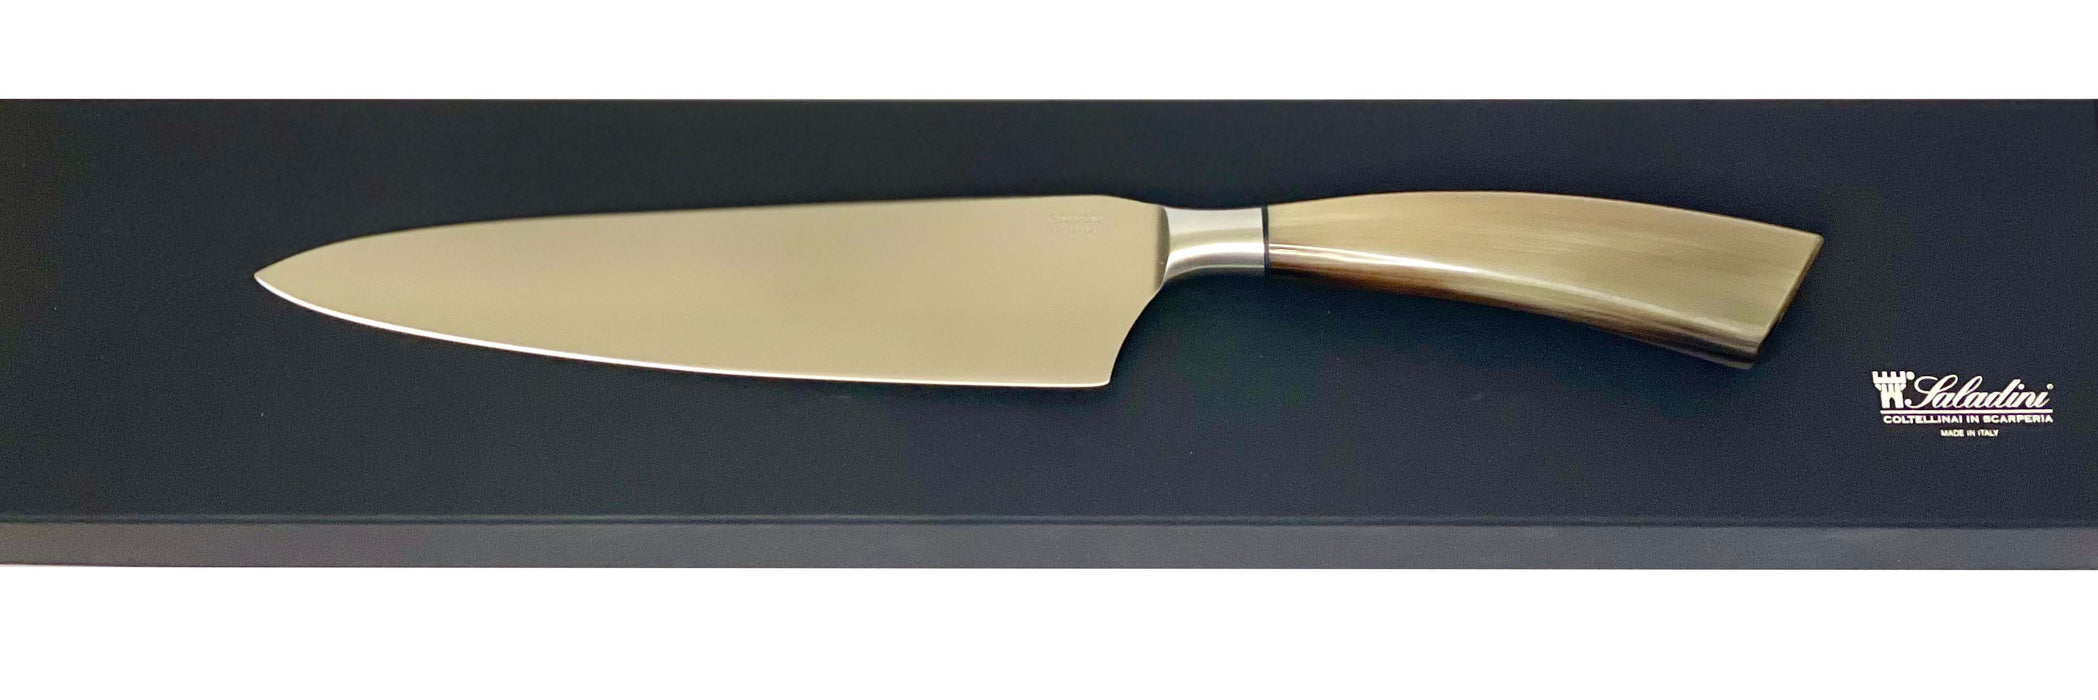 Coltelleria Saladini Stainless Steel Chef’s Knife with Ox Horn Handle, 8-Inch